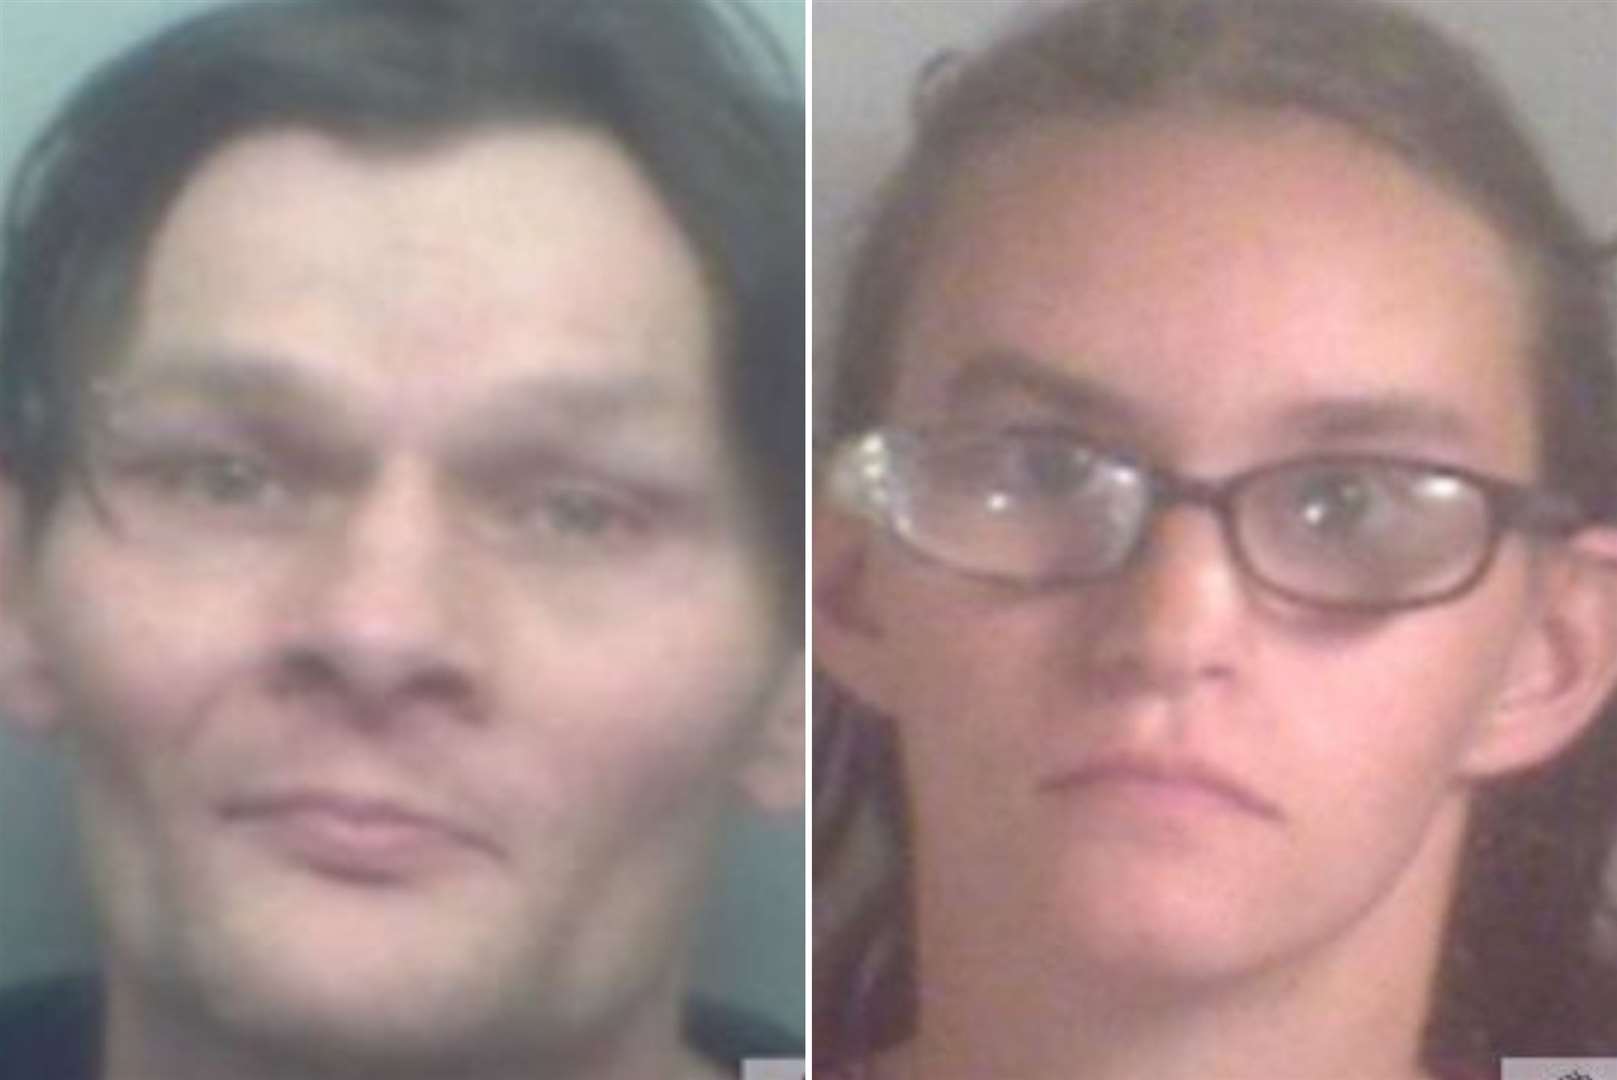 Tony Smith and Jody Simpson were sentenced to 10 years in prison in 2018